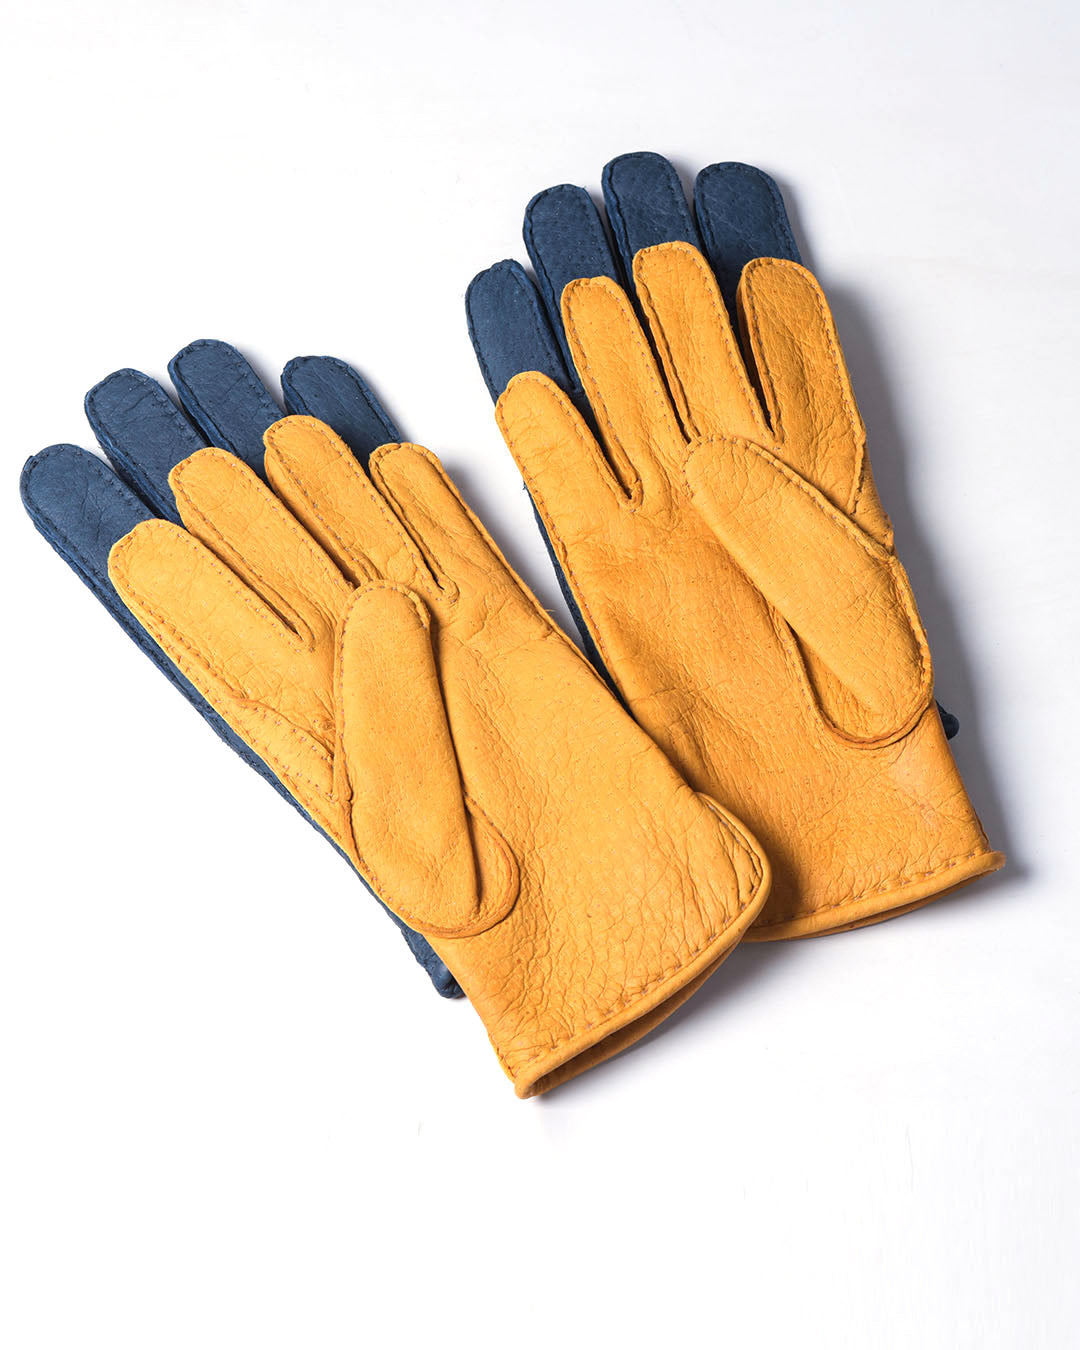 Peccary Gloves - Cashmere lined - Navy